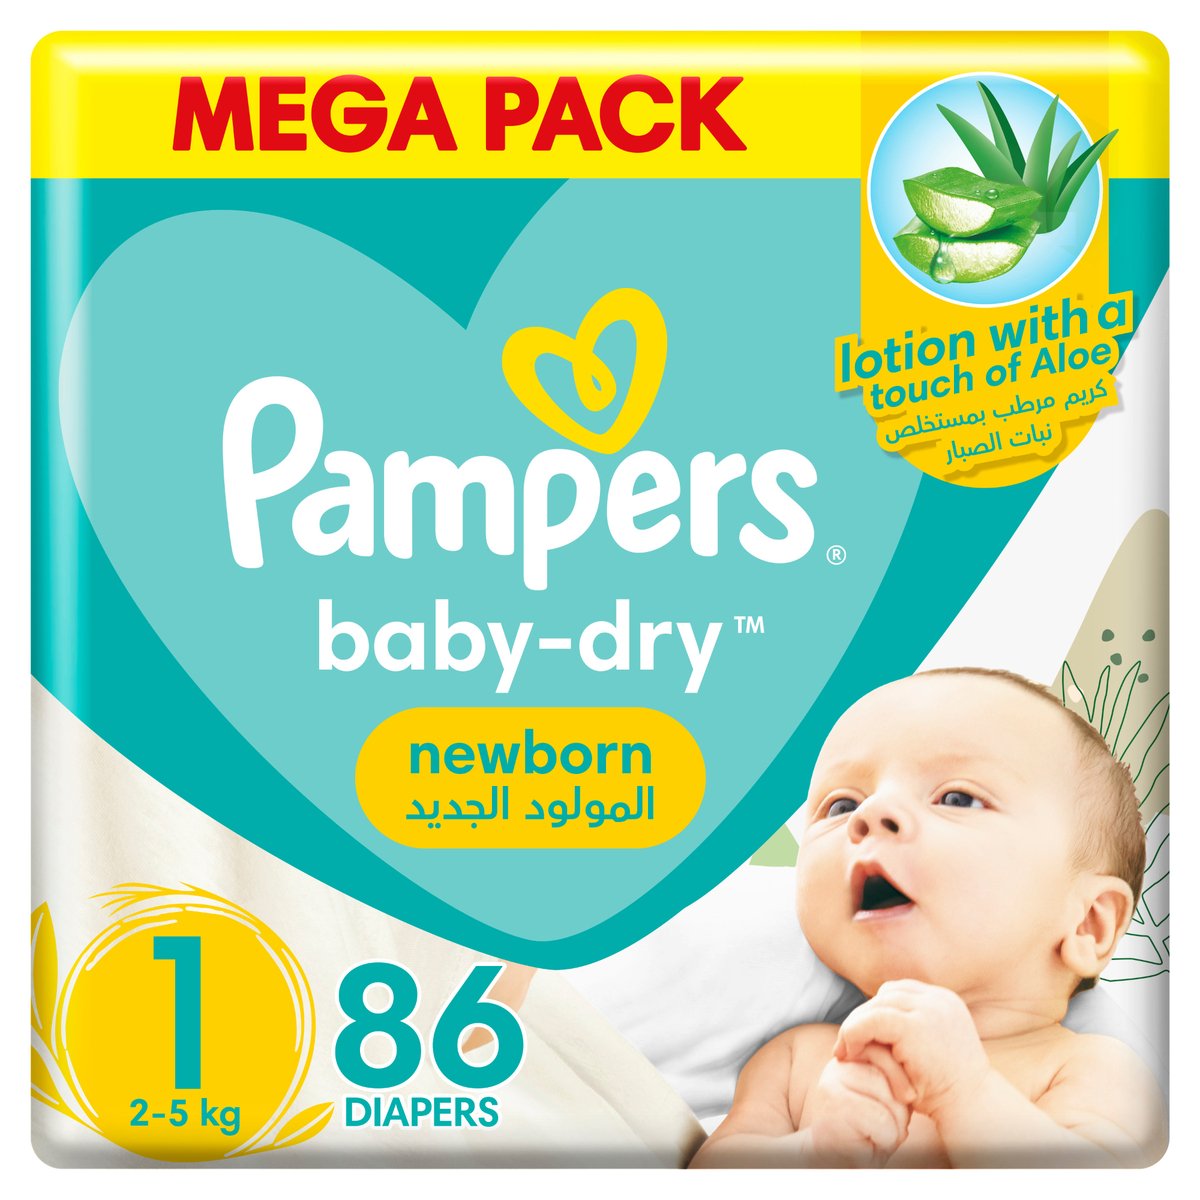 Pampers Baby-Dry Newborn Taped Diapers with Aloe Vera Lotion, up to 100% Leakage Protection, Size 1, 2-5kg, Mega Pack, 86 pcs